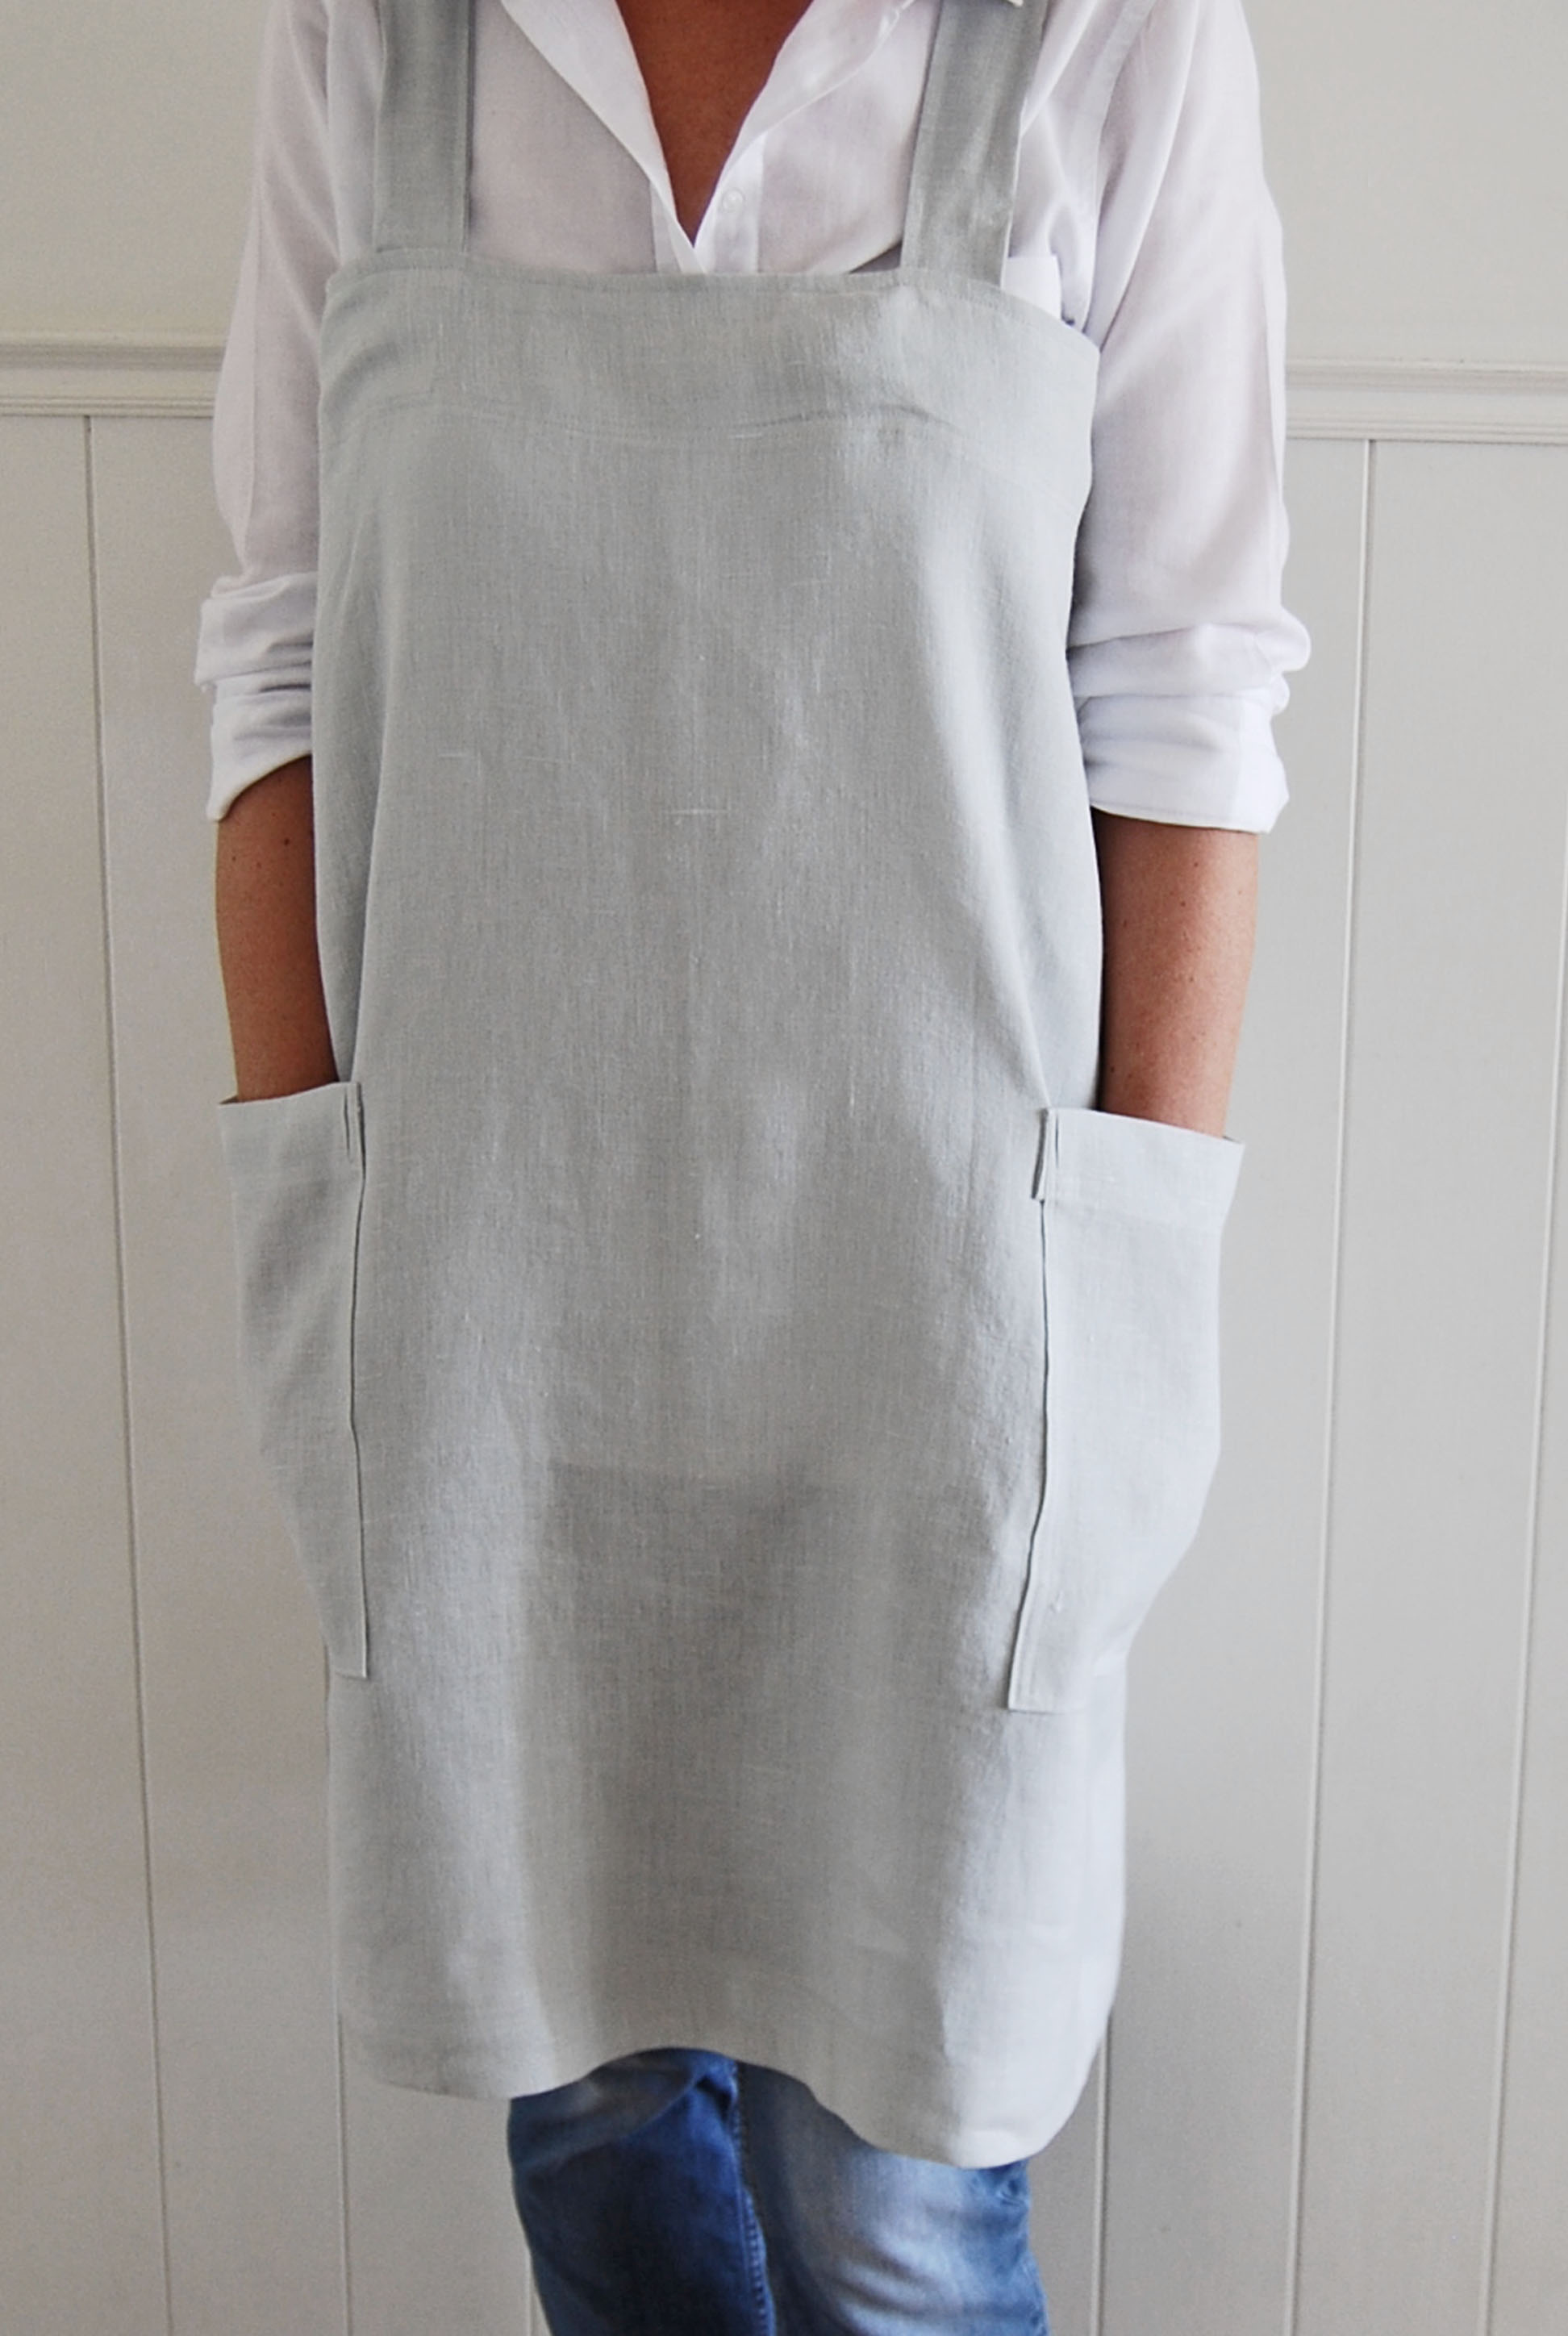 Angela, Cross back apron in softened dove linen. Available to buy at www.palegreyskies@etsy.com
